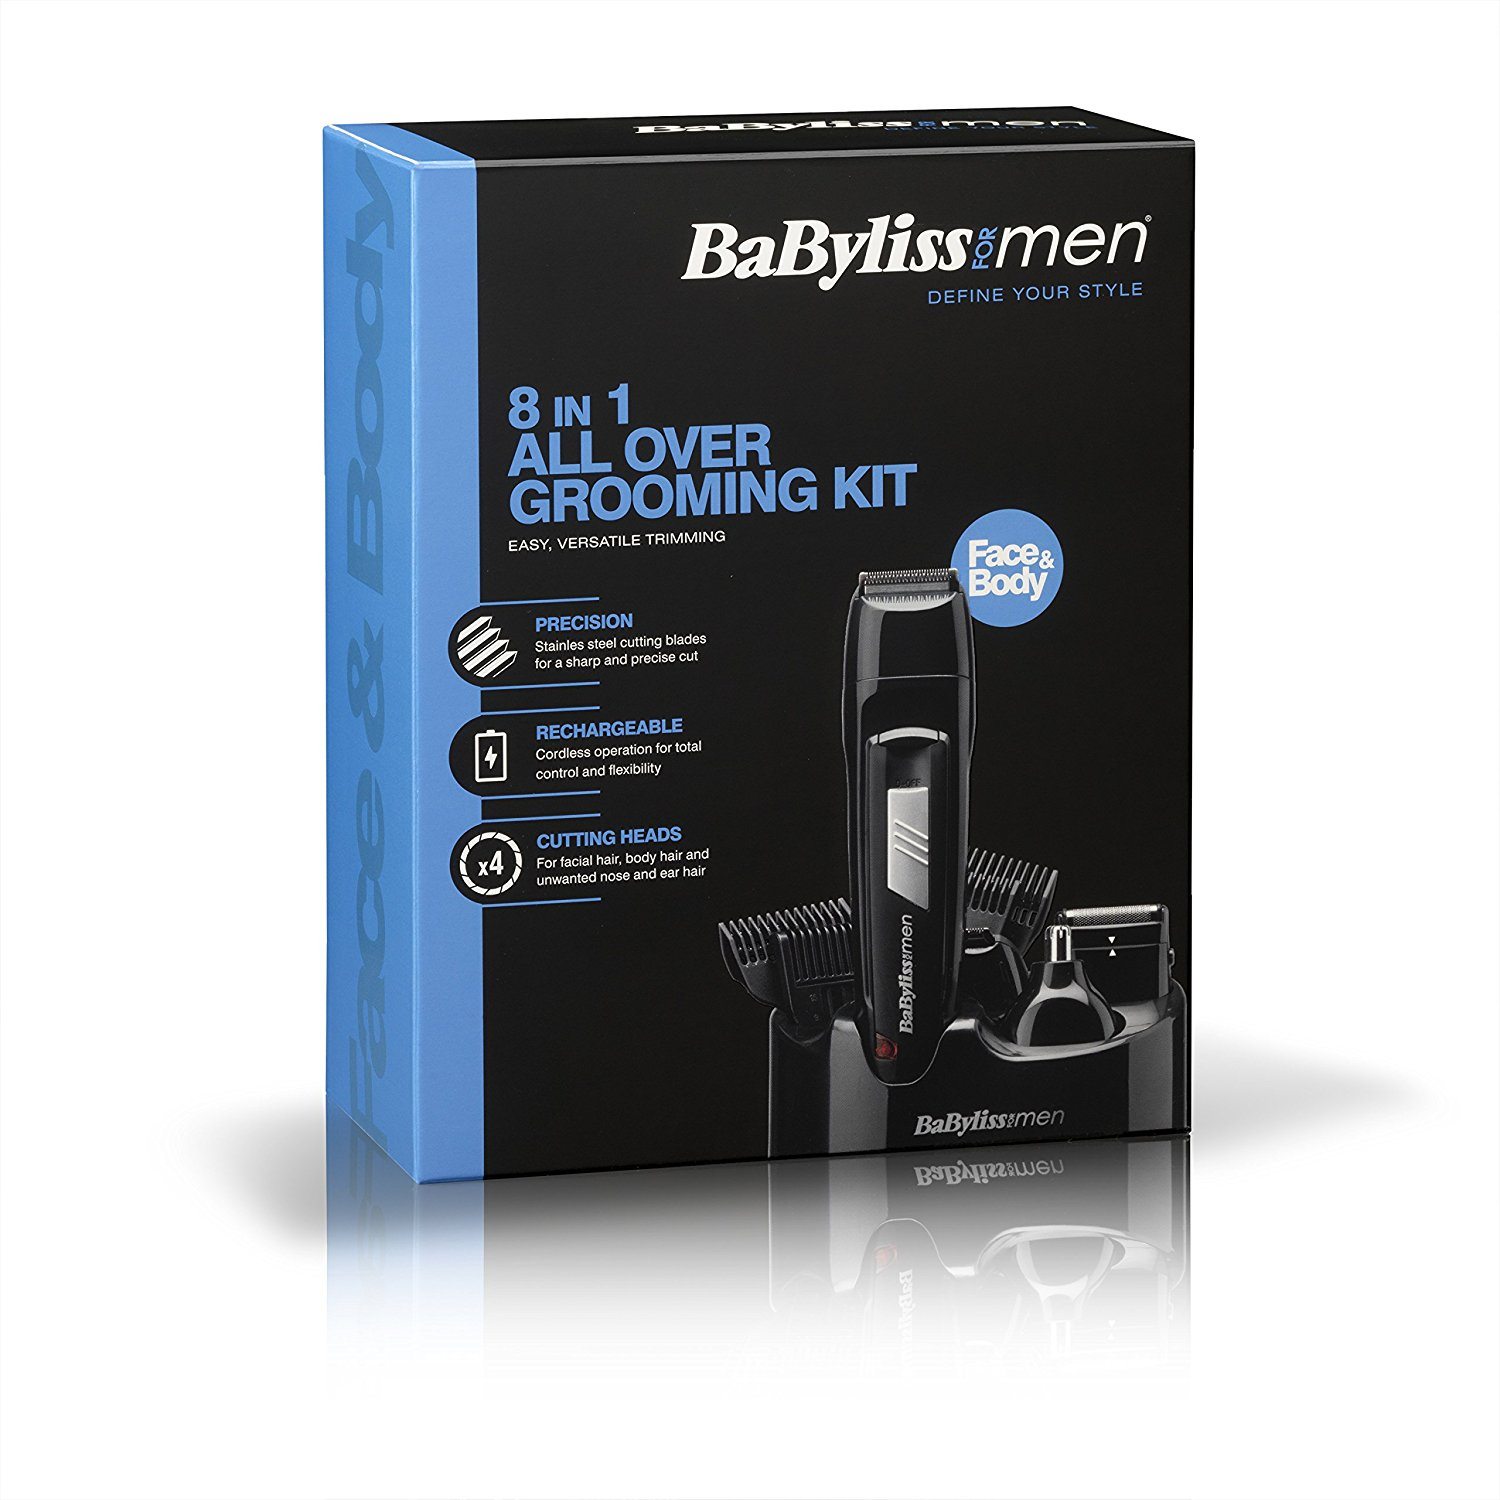 Babyliss 7056CU Cordless Rechargeable 8 In 1 All Over Grooming Kit UK Review in box